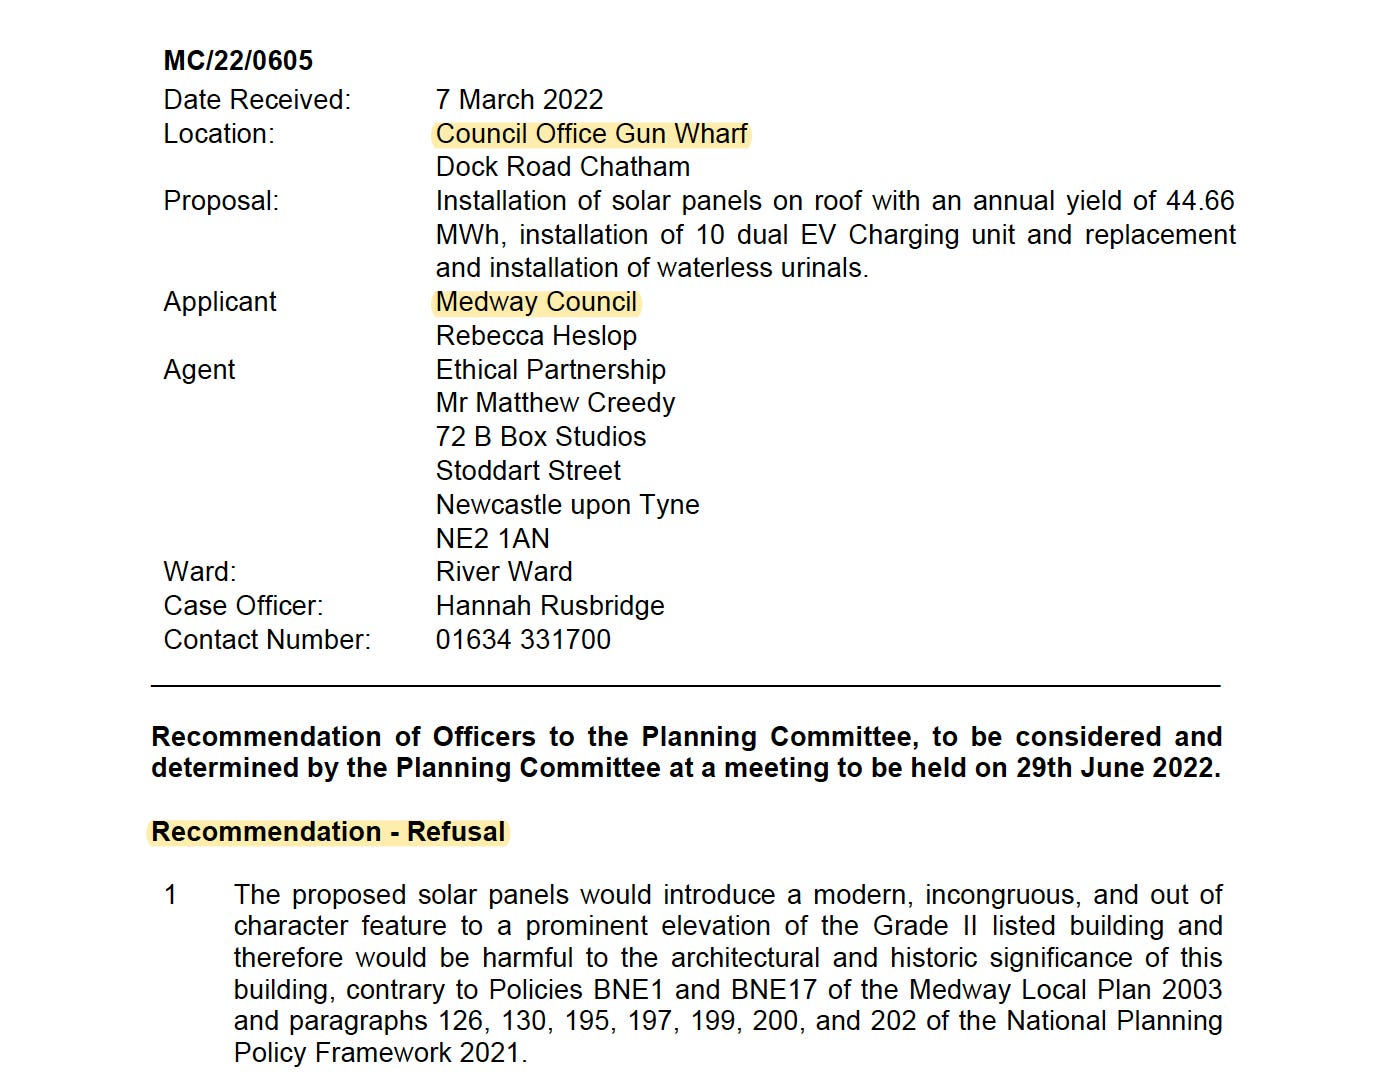 Medway Council planning document that proposes refusal for Medway Council's own planning application to install solar panels on the roof of Medway Council's headquarters.